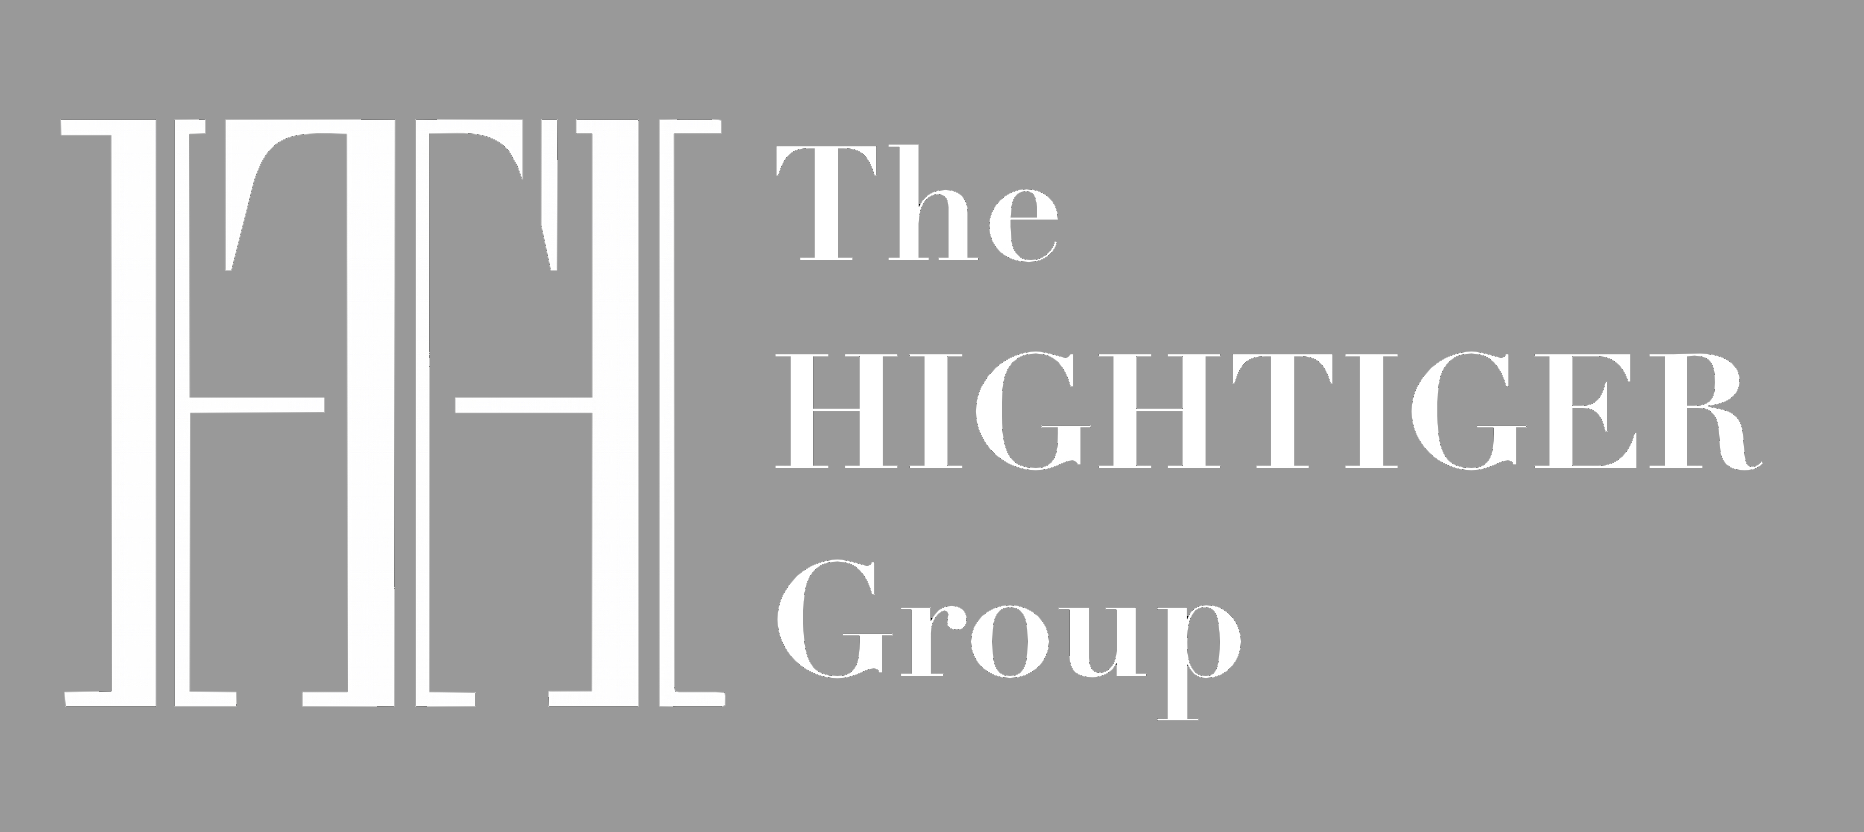 The HIGHTIGER Group